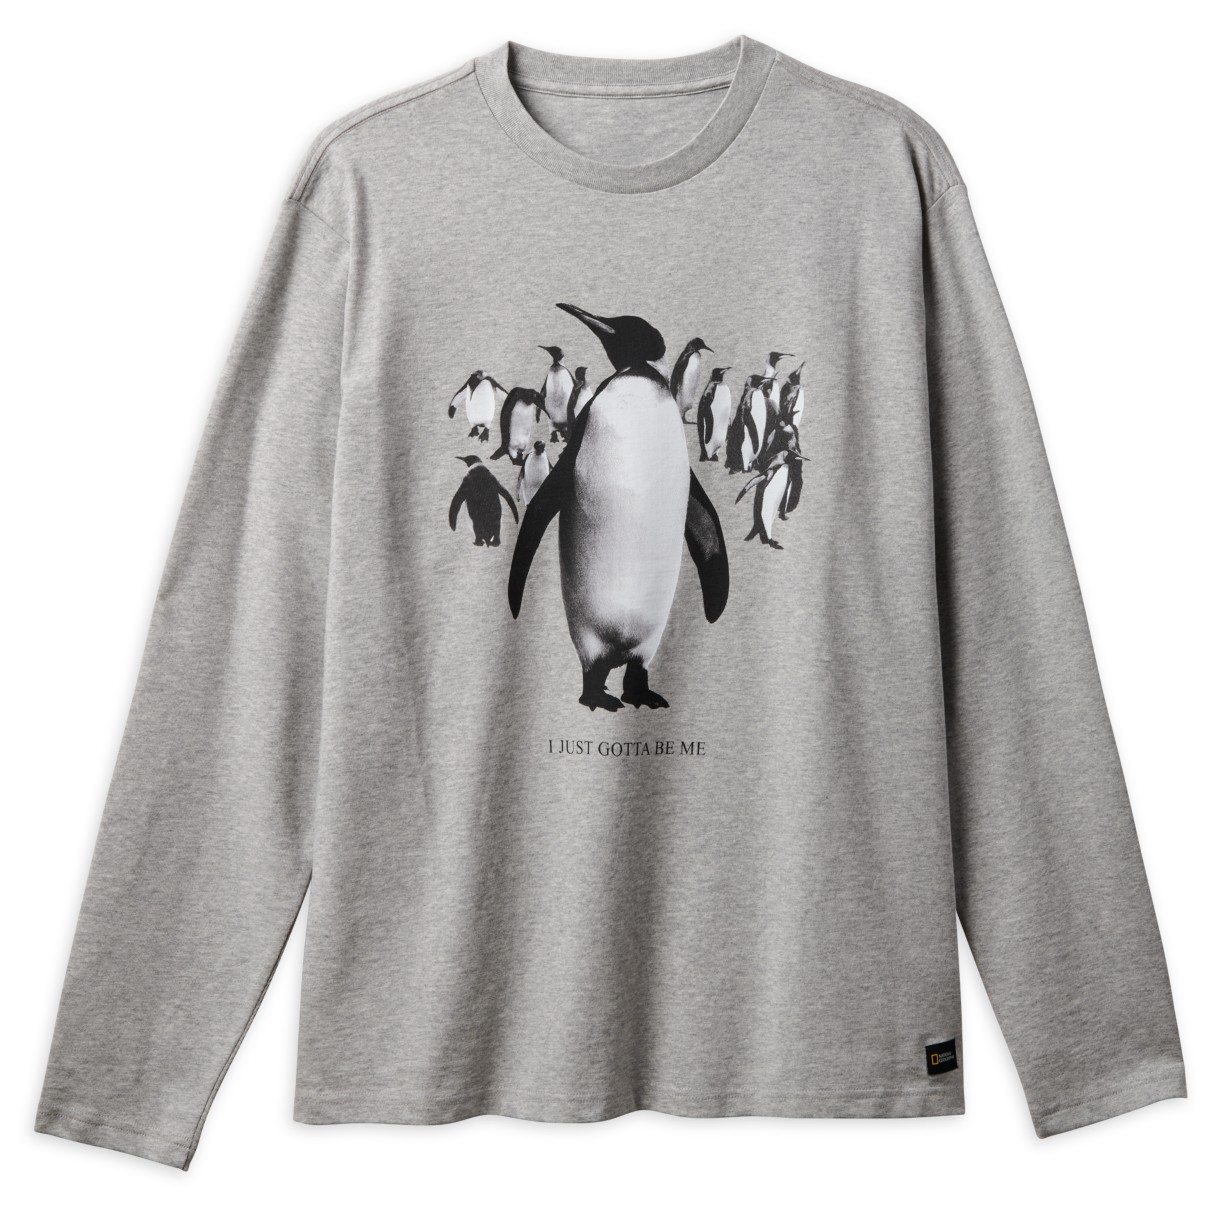 National Geographic Penguin Long Sleeve T-Shirt for Adults